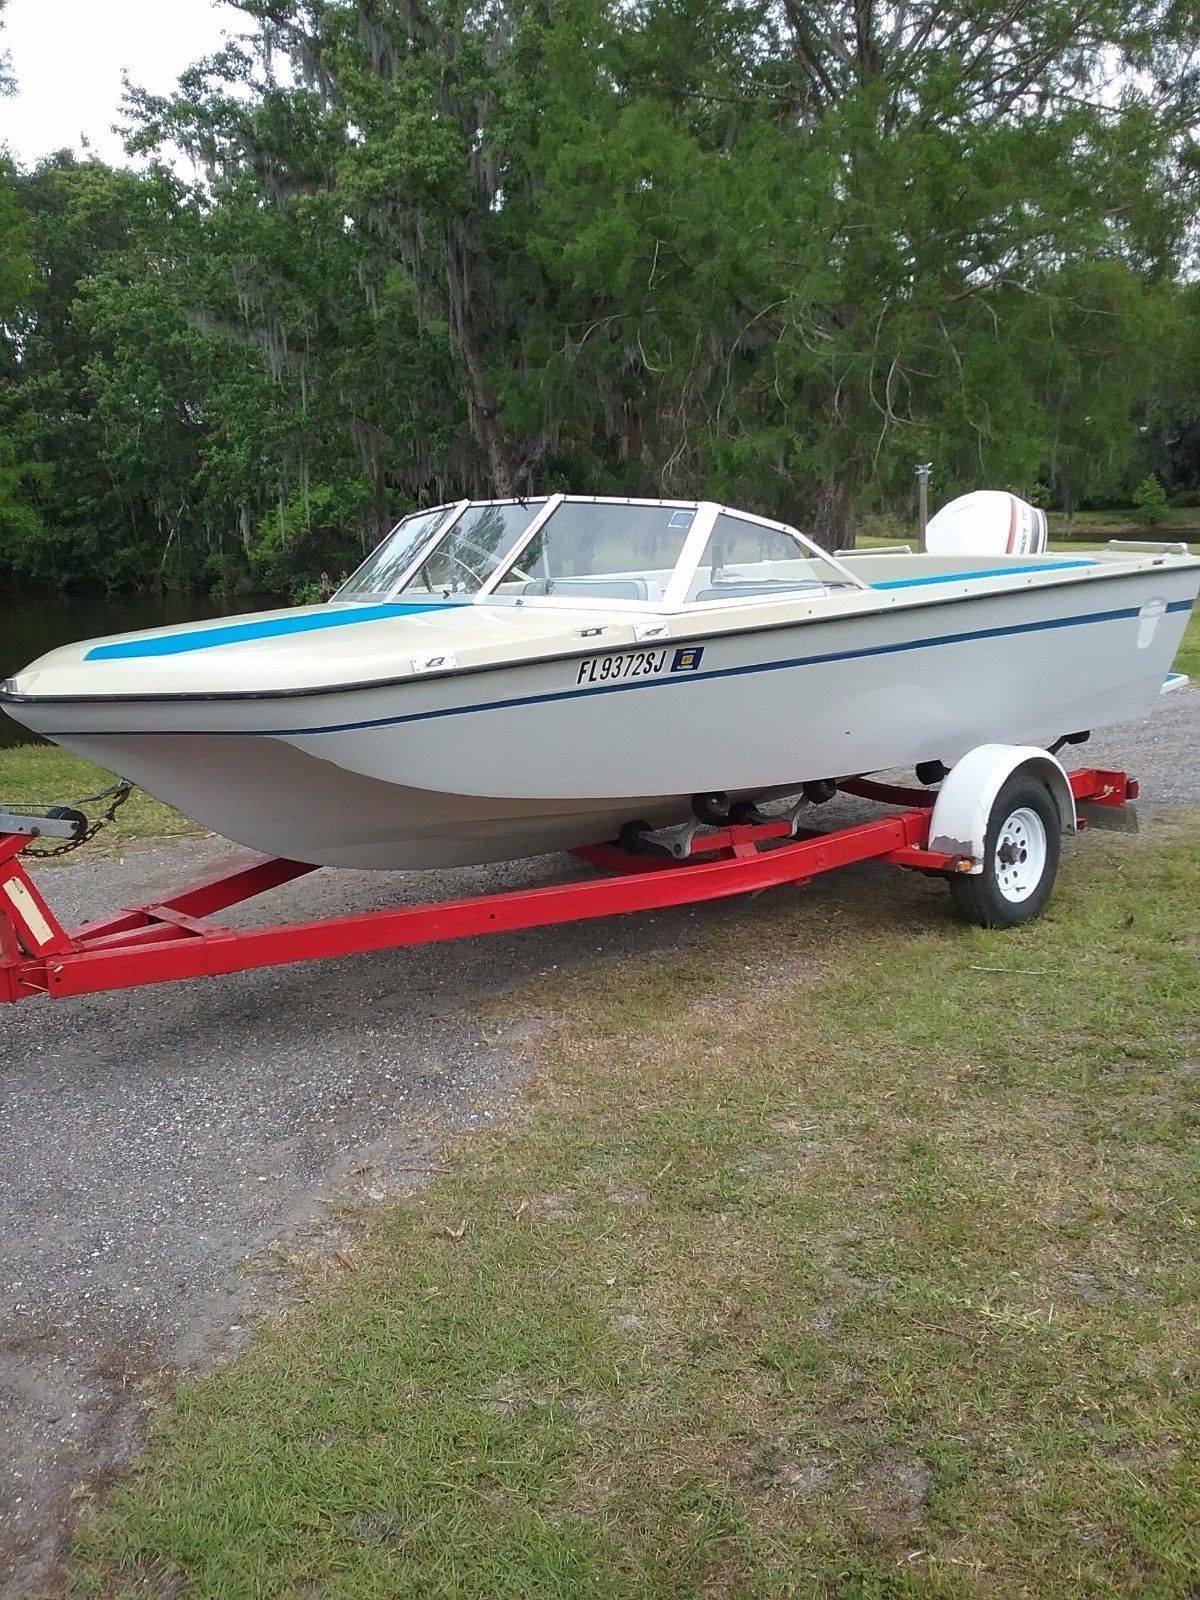 Switzer Craft Ski Boat 1983 For Sale For 100 Boats From 2223